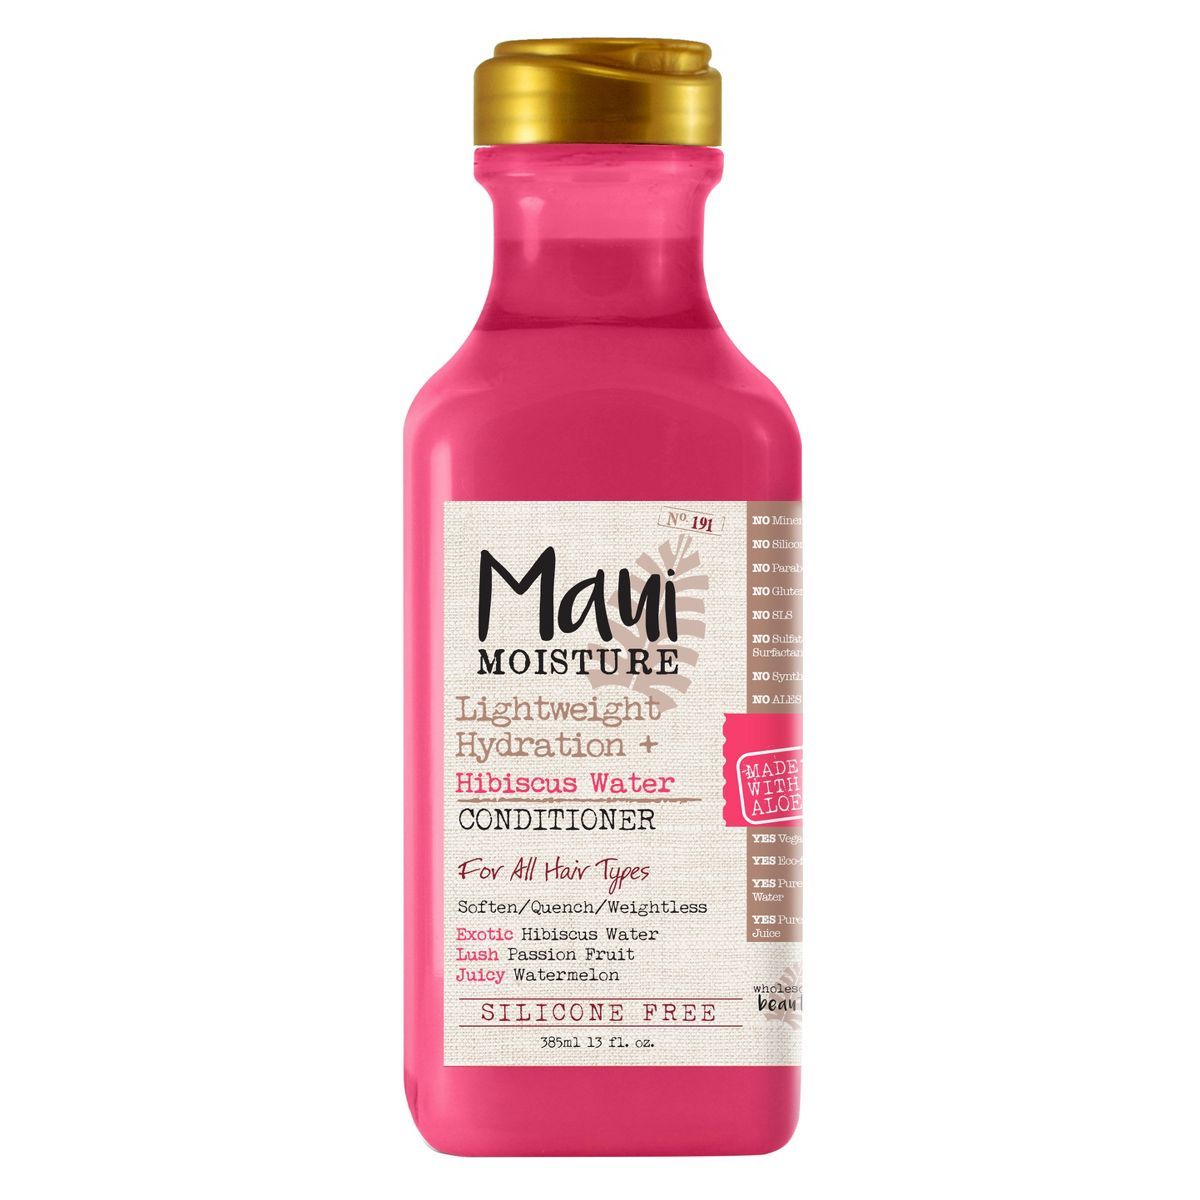 Maui Moisture Lightweight Hydration + Hibiscus Water Conditioner for Daily Moisture - 13 fl oz | Target